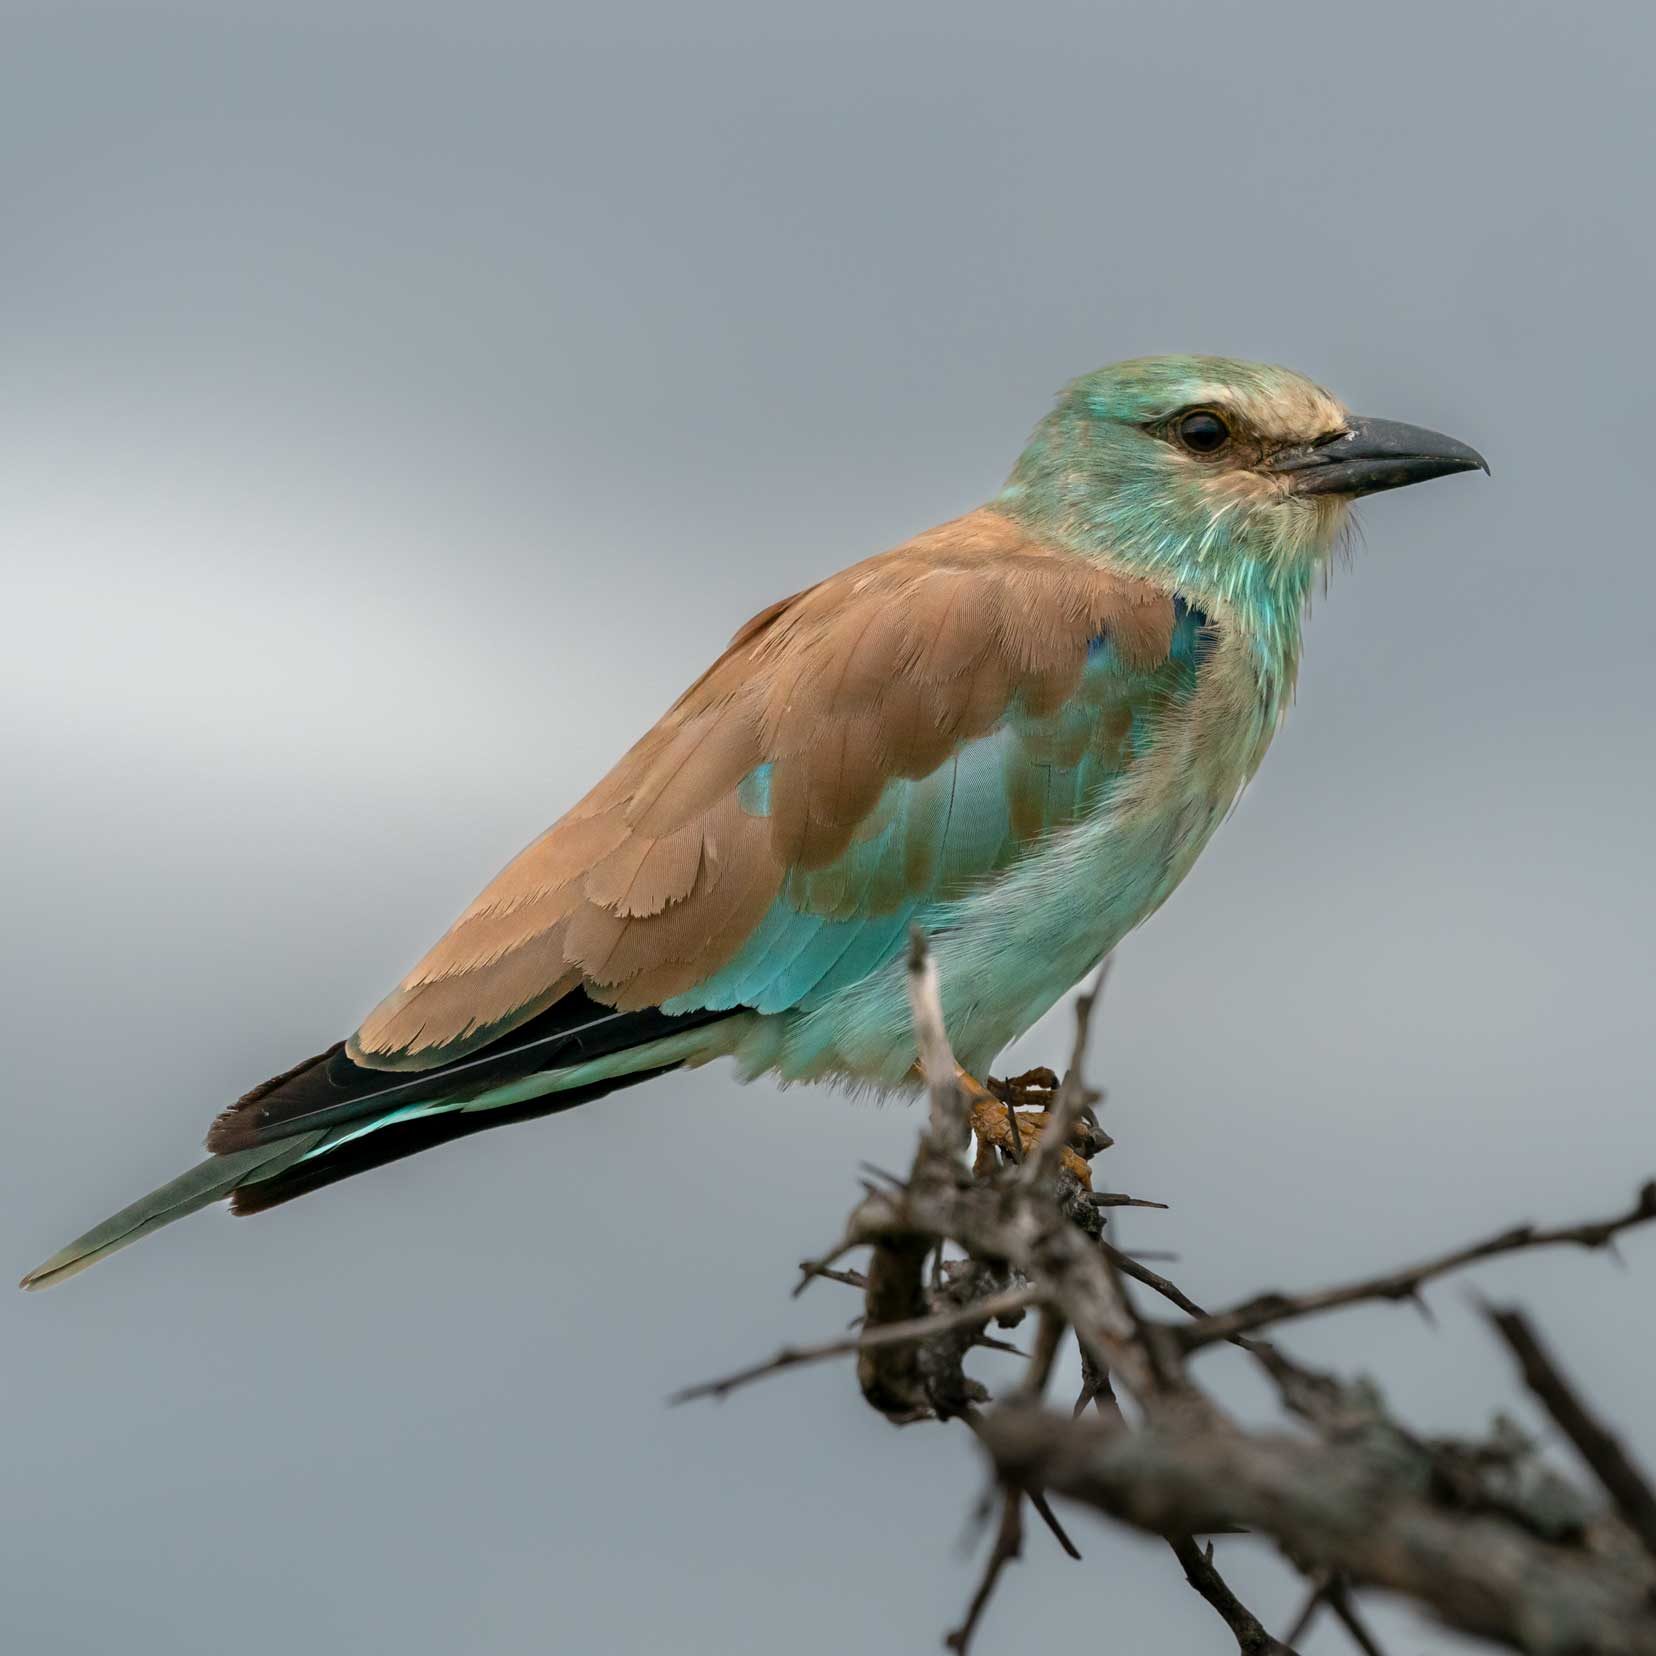 European Roller with turquoise front and light brown back